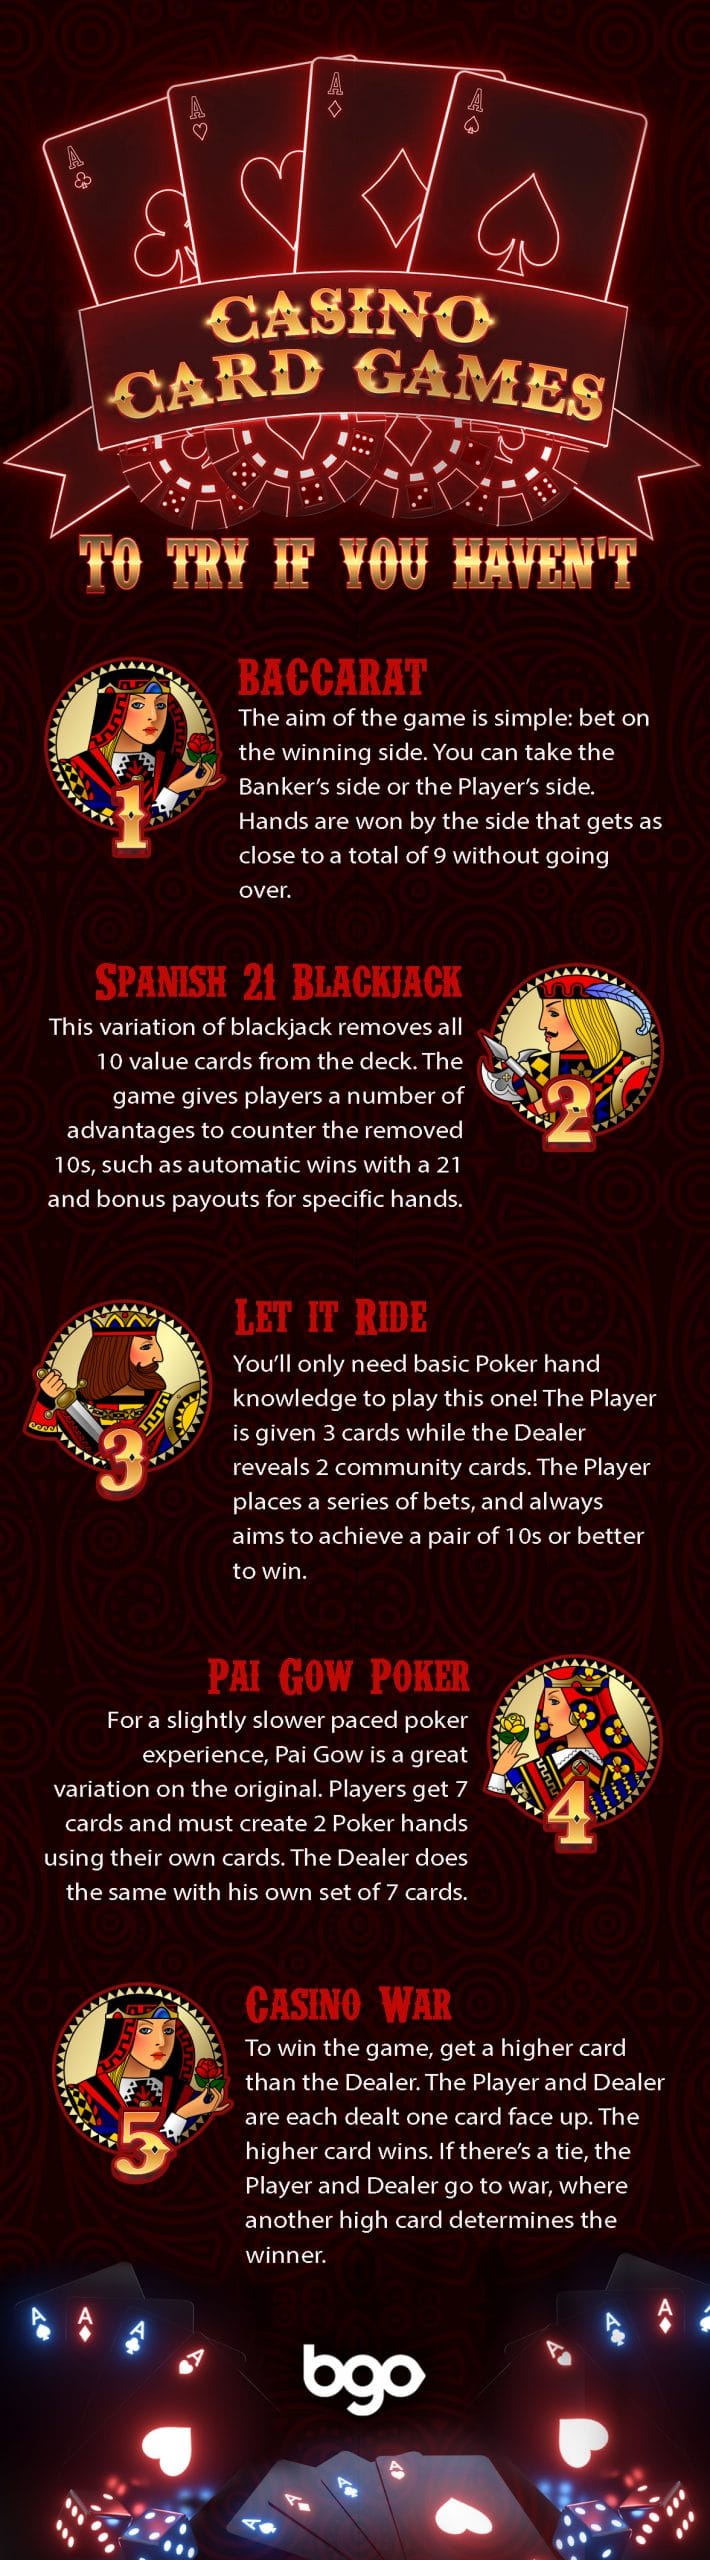 Casino Card Games to try if you havent infographic